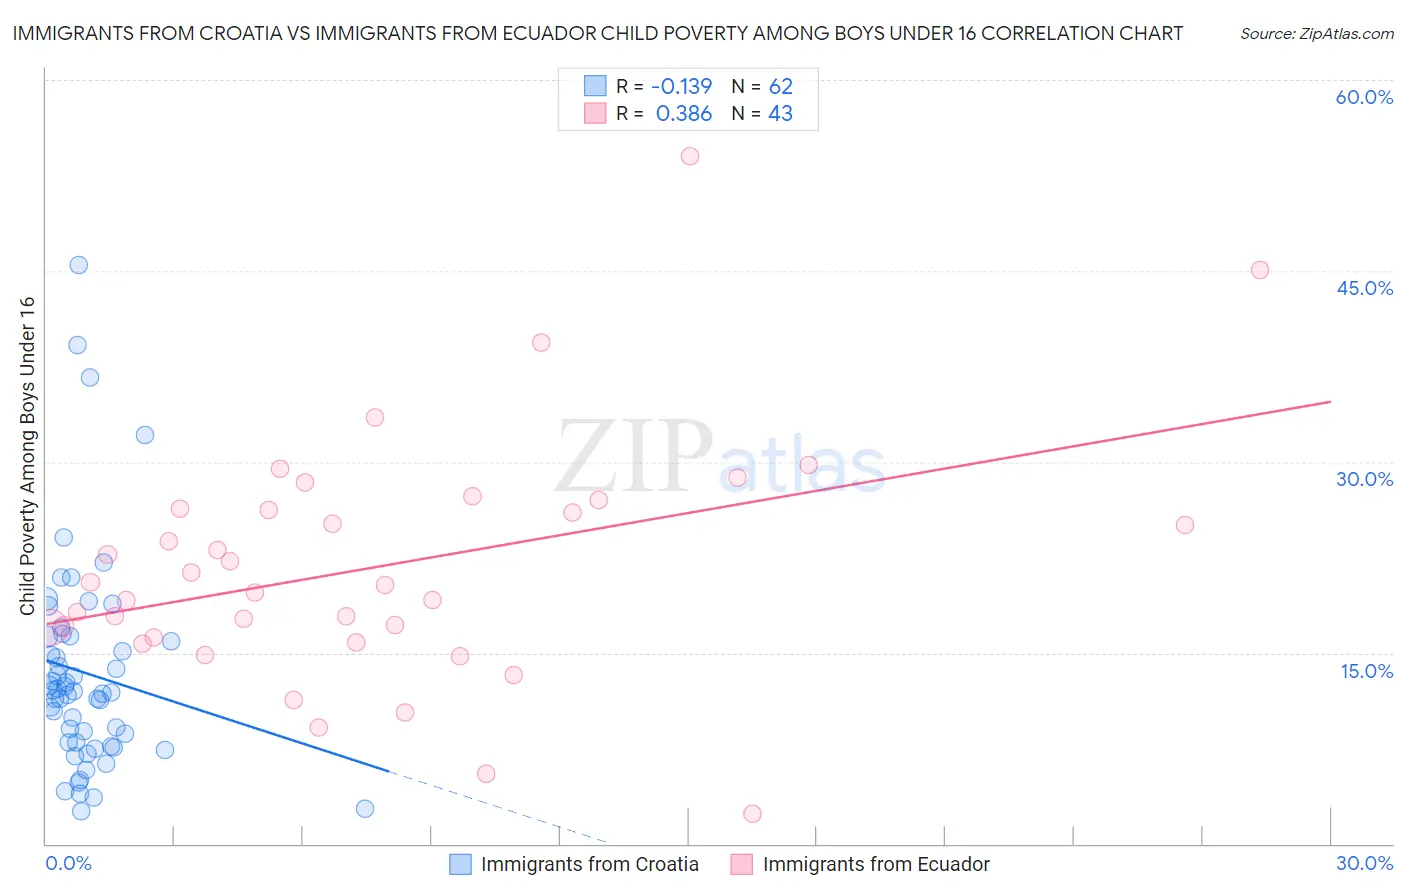 Immigrants from Croatia vs Immigrants from Ecuador Child Poverty Among Boys Under 16